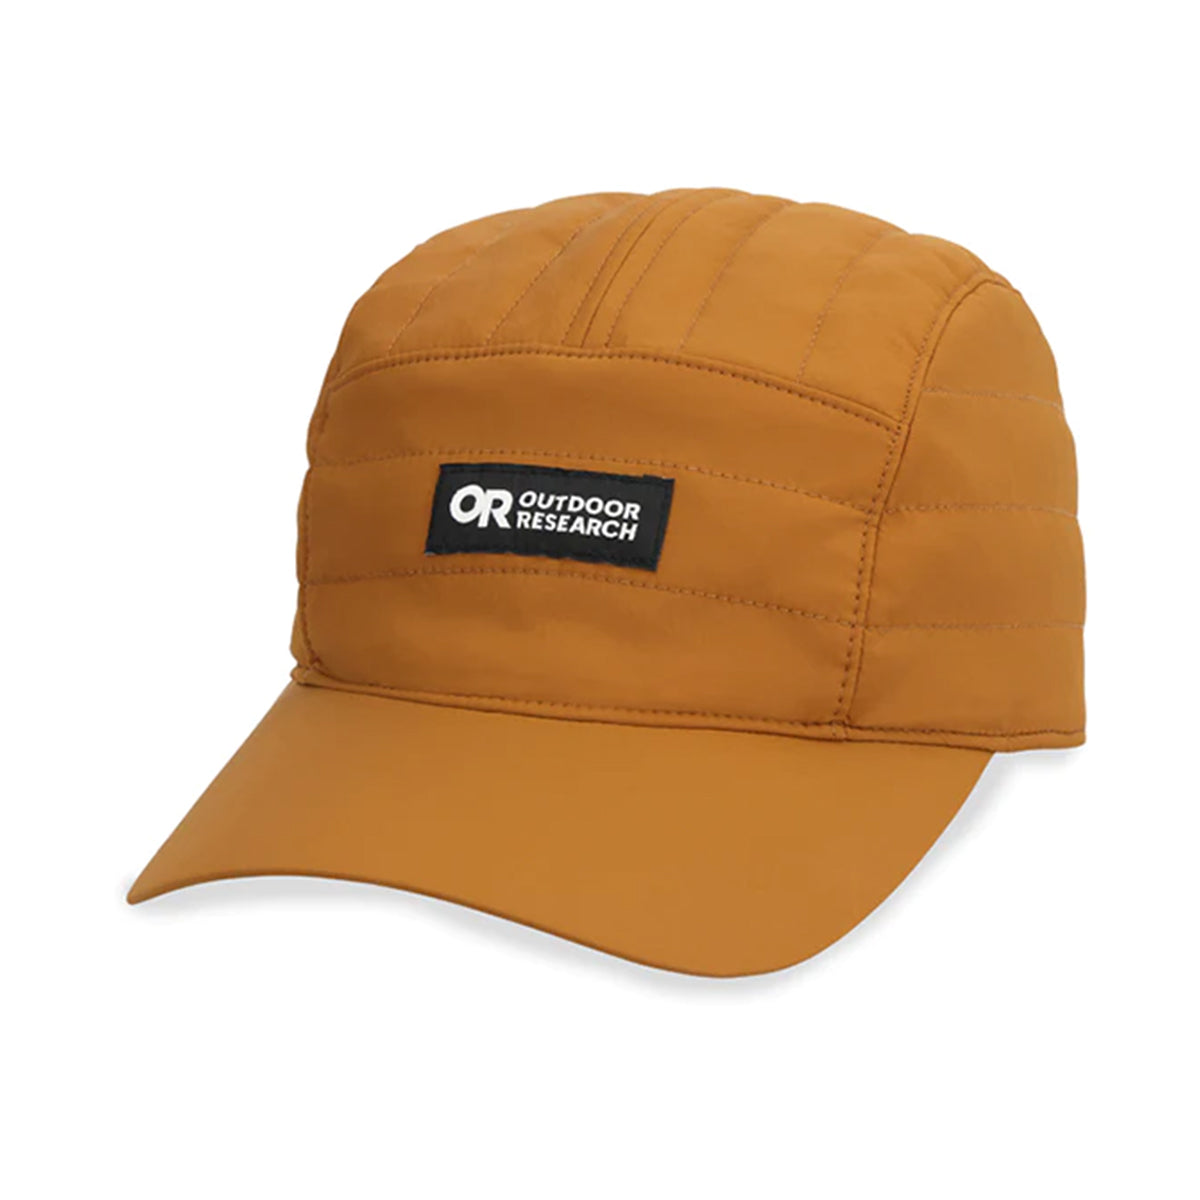 OUTDOOR RESEARCH Outdoor Research Shadow 5 Panel Cap